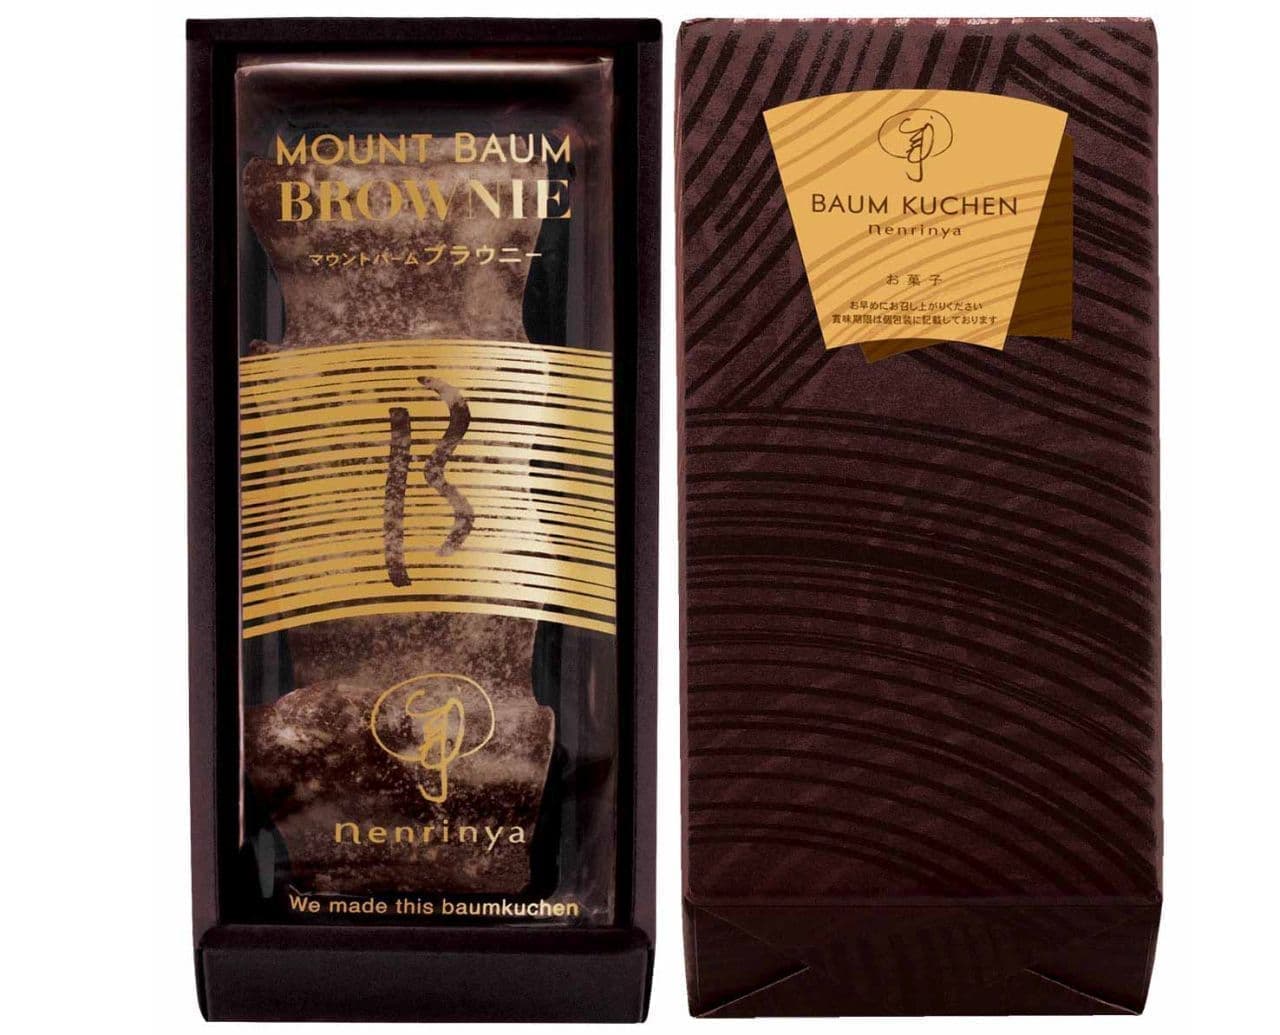 Nenrin family winter limited "Mount Balm Brownie"